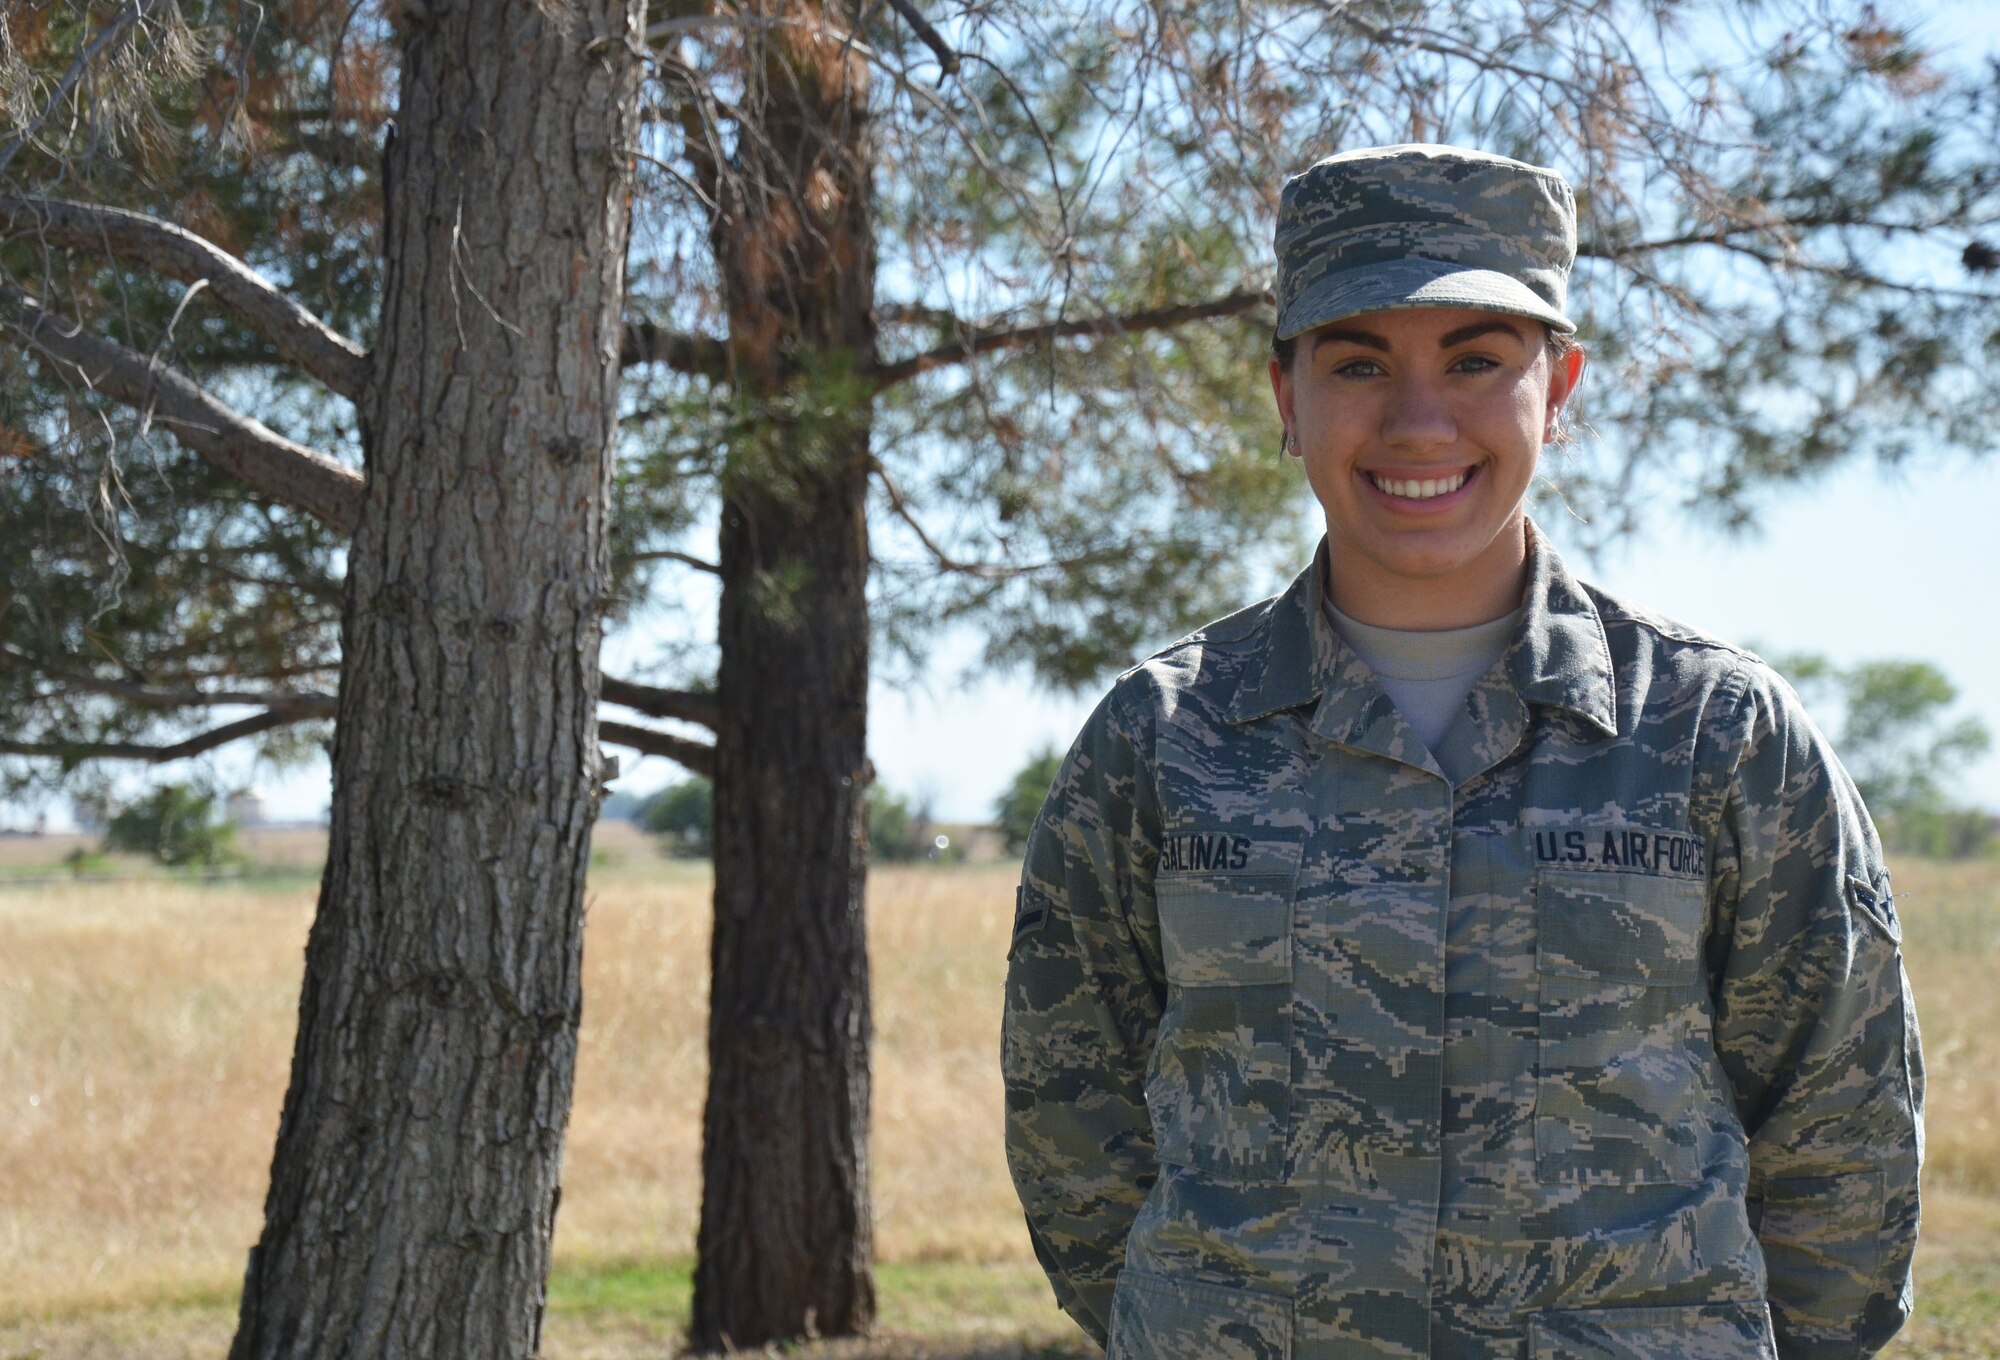 Airman Alicia Salinas, 9th Aerospace Medicine Squadron Public Health technician, poses for a photo June 1, 2016, at Beale Air Force Base, California. (U.S. Air Force photo by Airman Tommy Wilbourn)